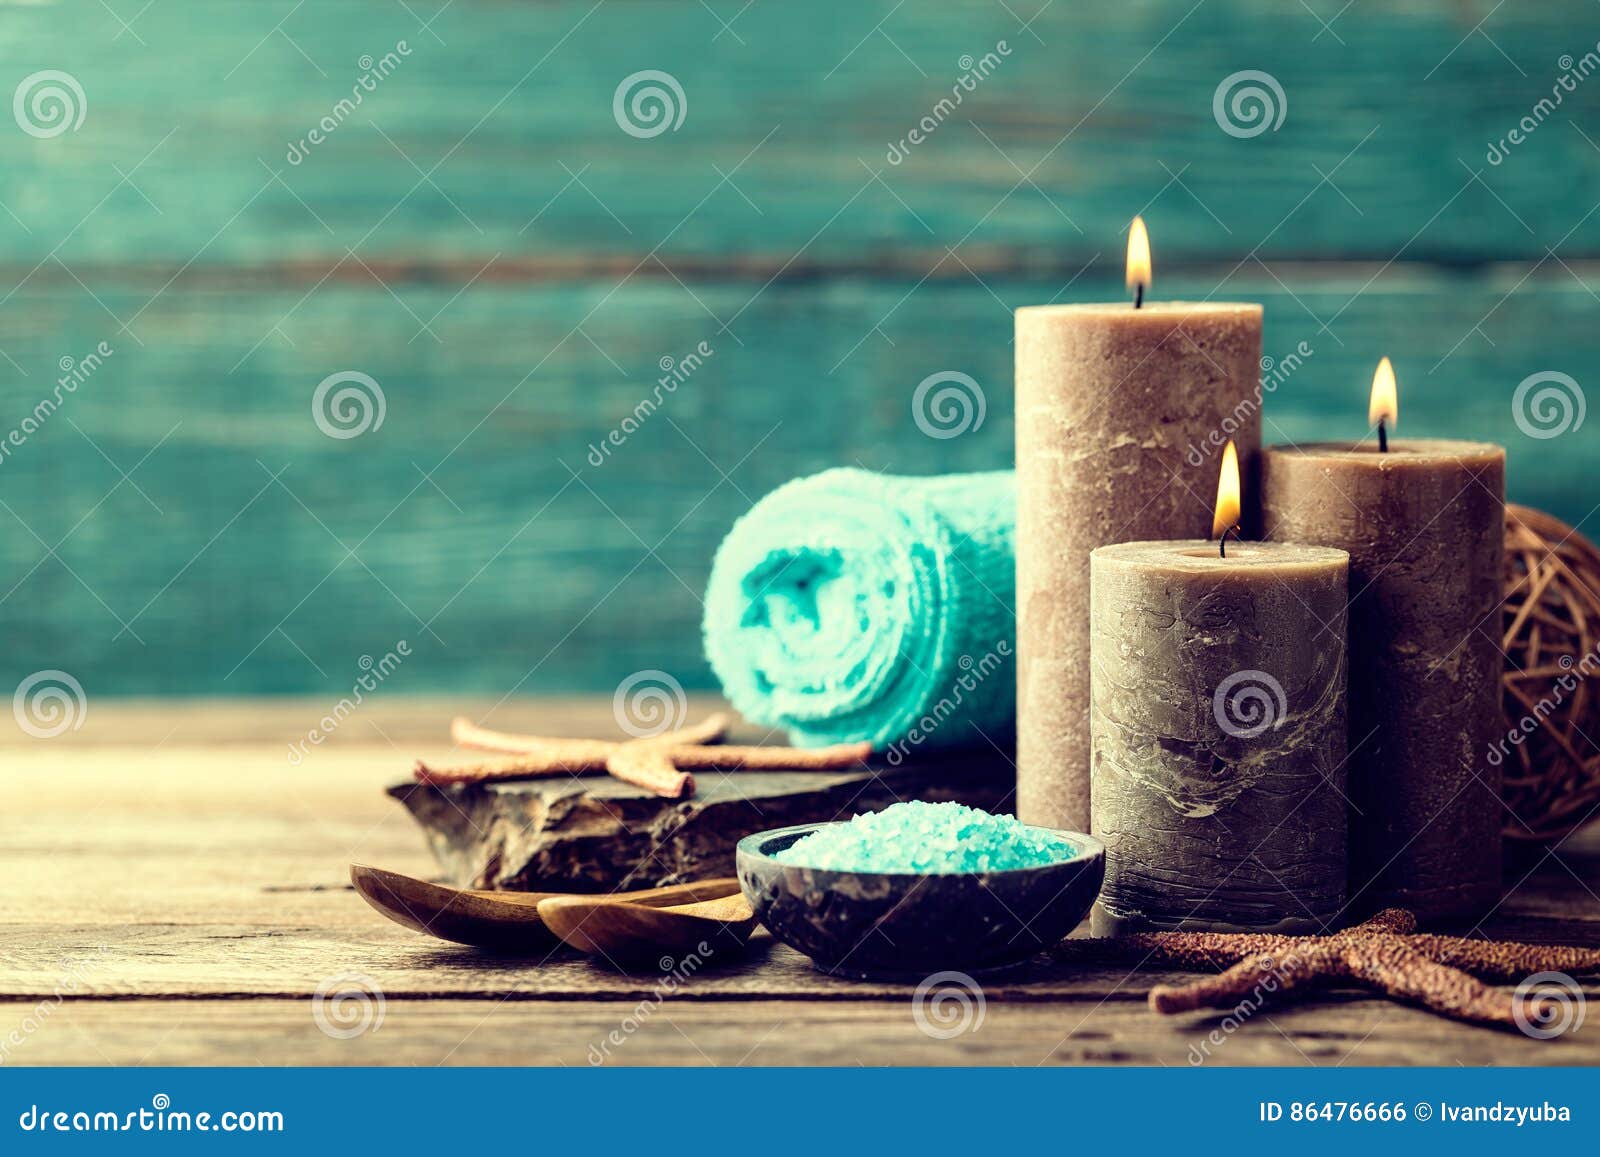 set for spa treatments with cosmetic products for body care and relaxation